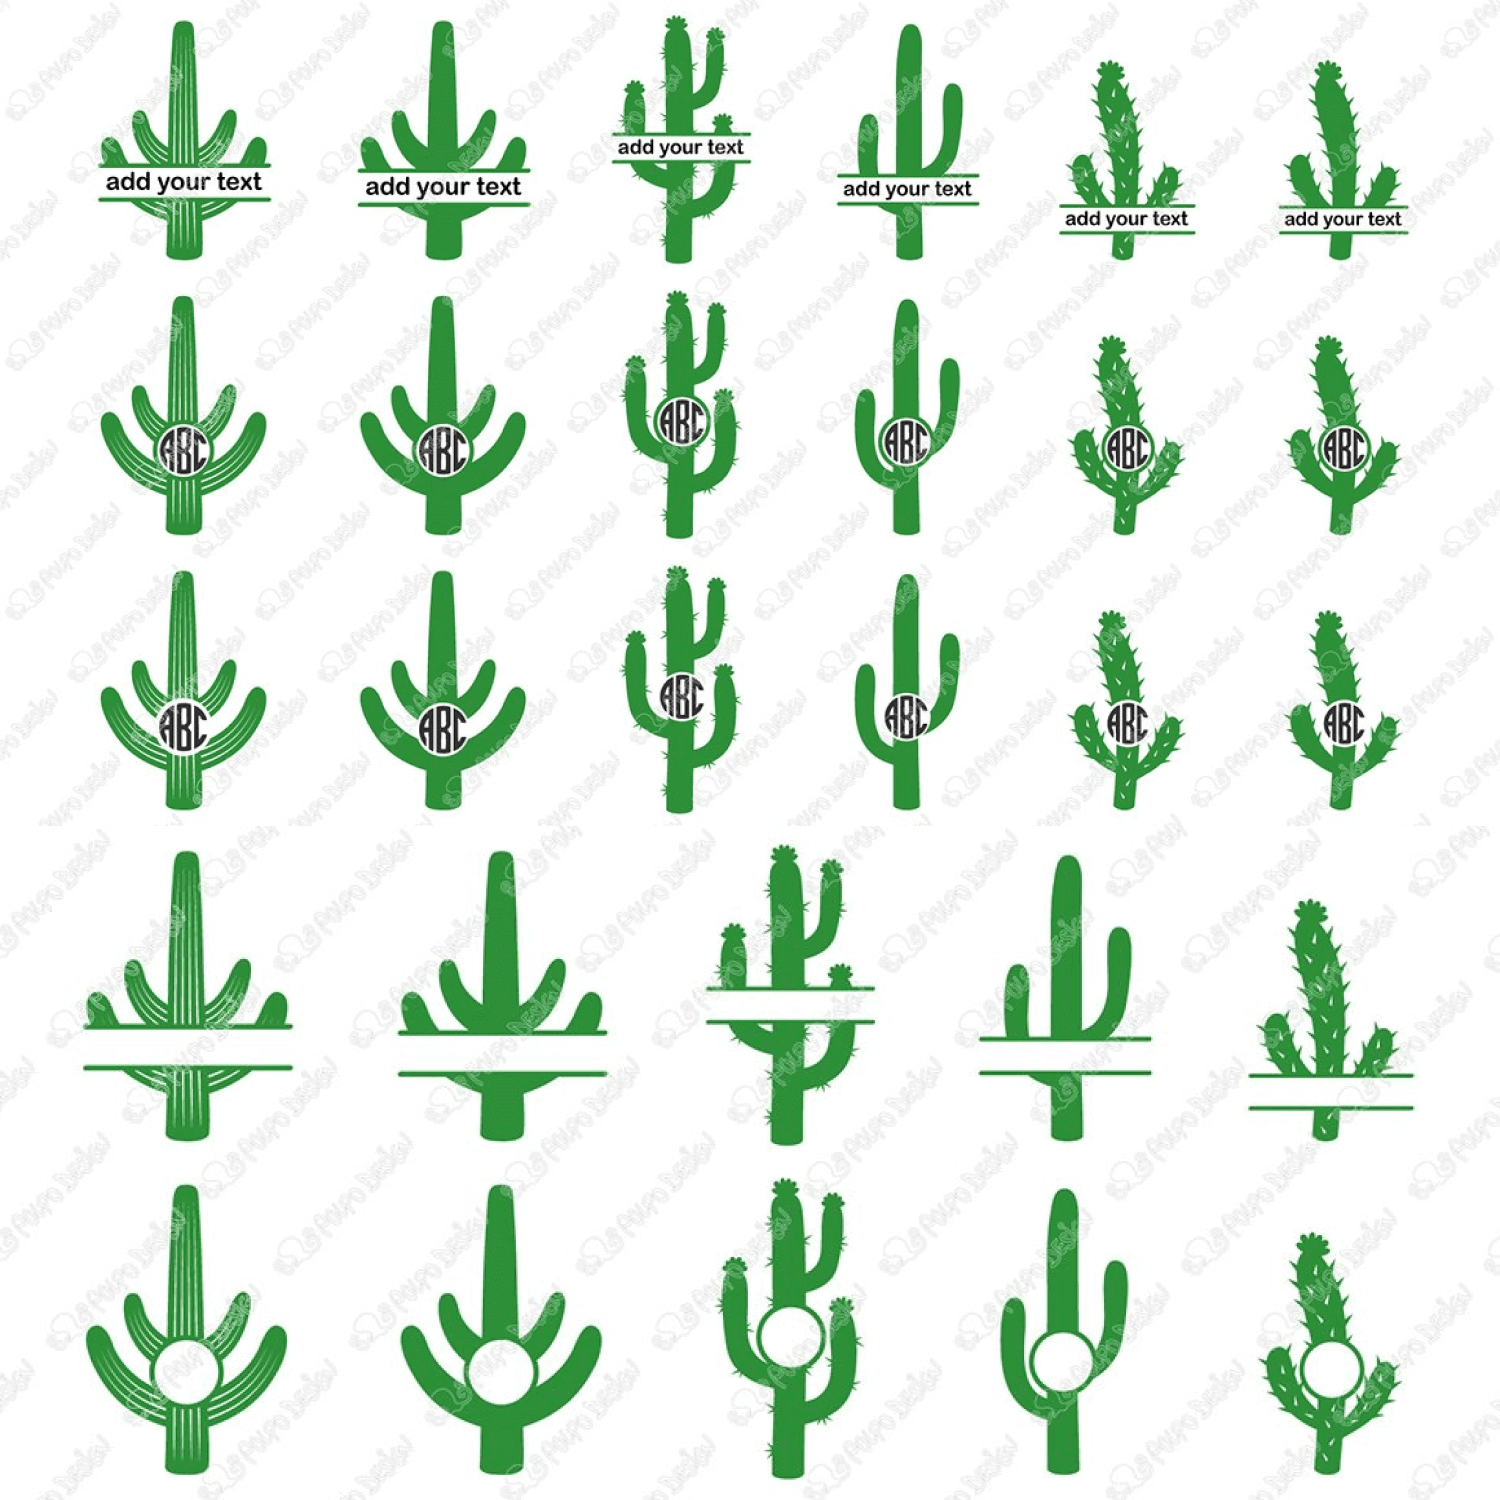 Many Cactuses with Your Text.